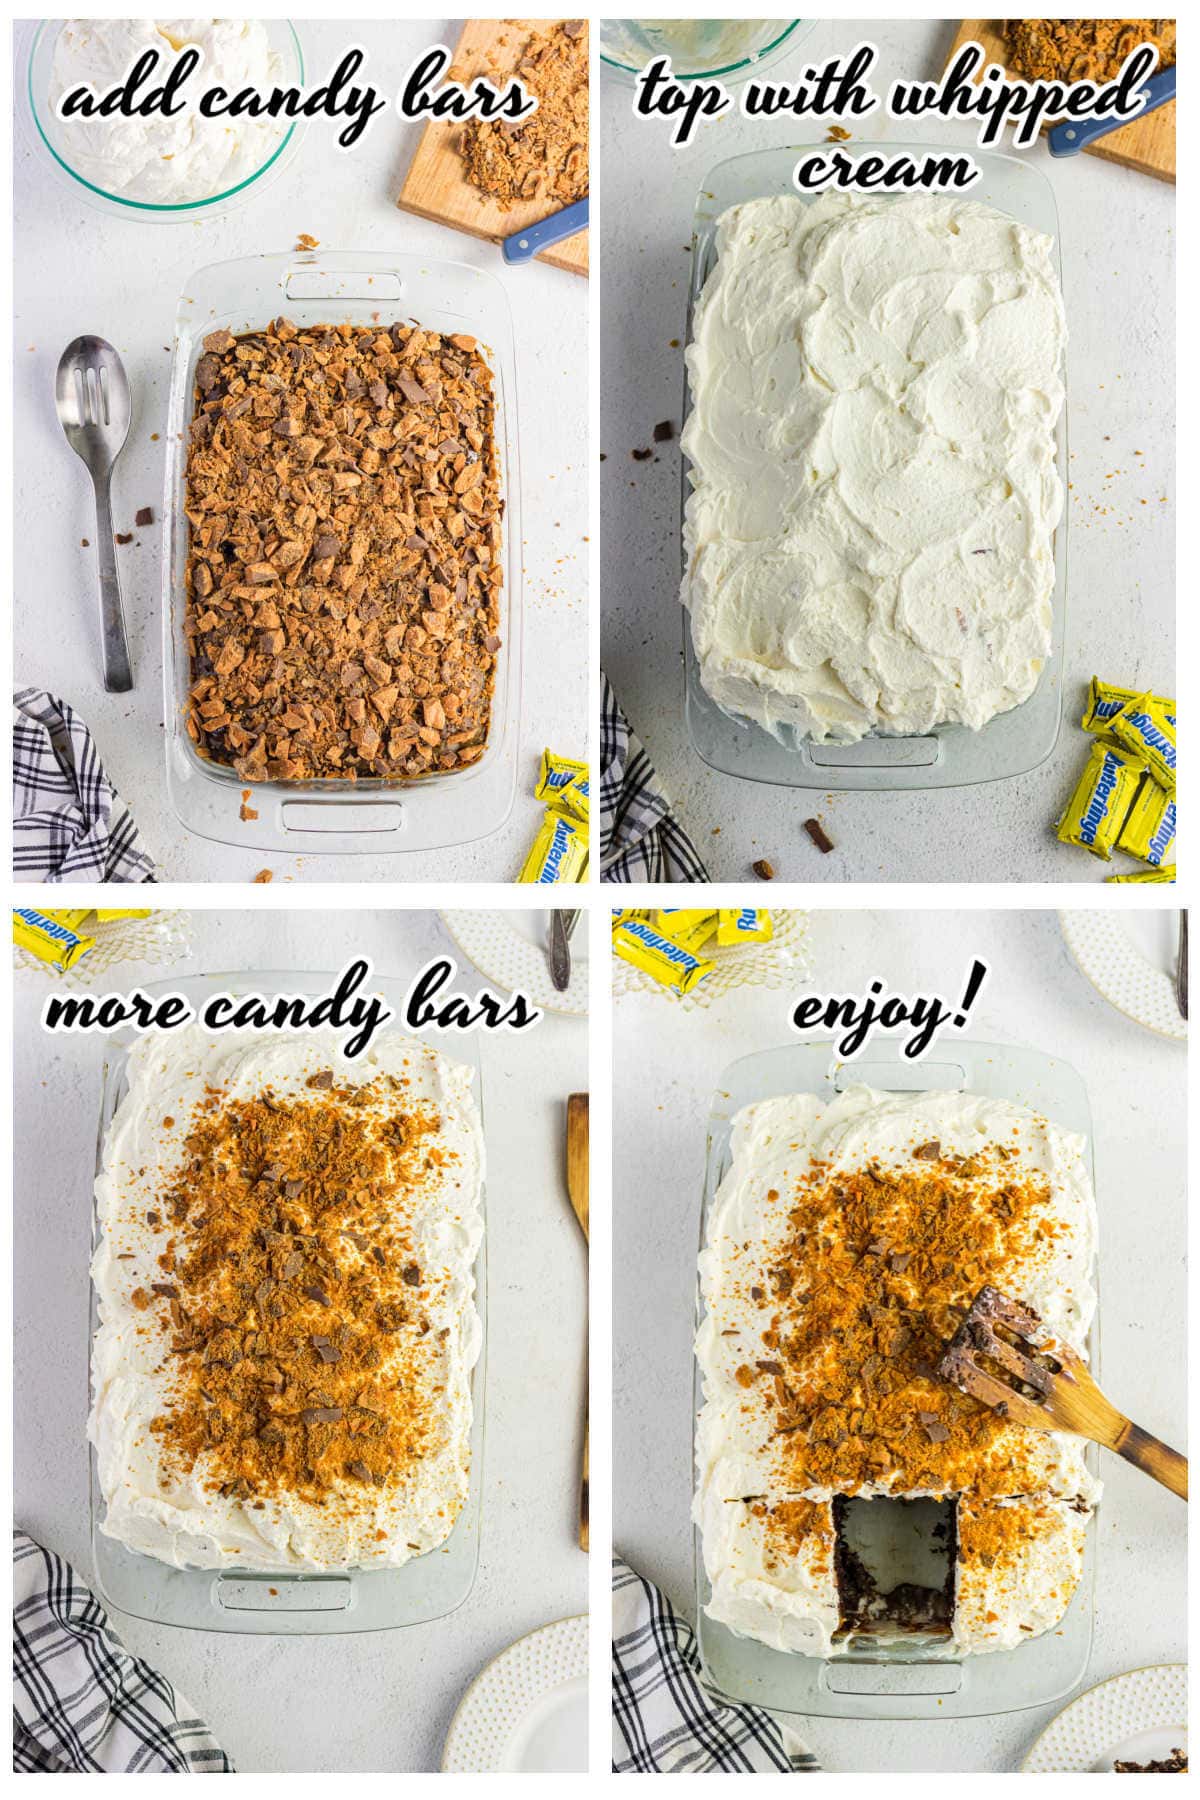 Collage of steps showing how to finish the cake.